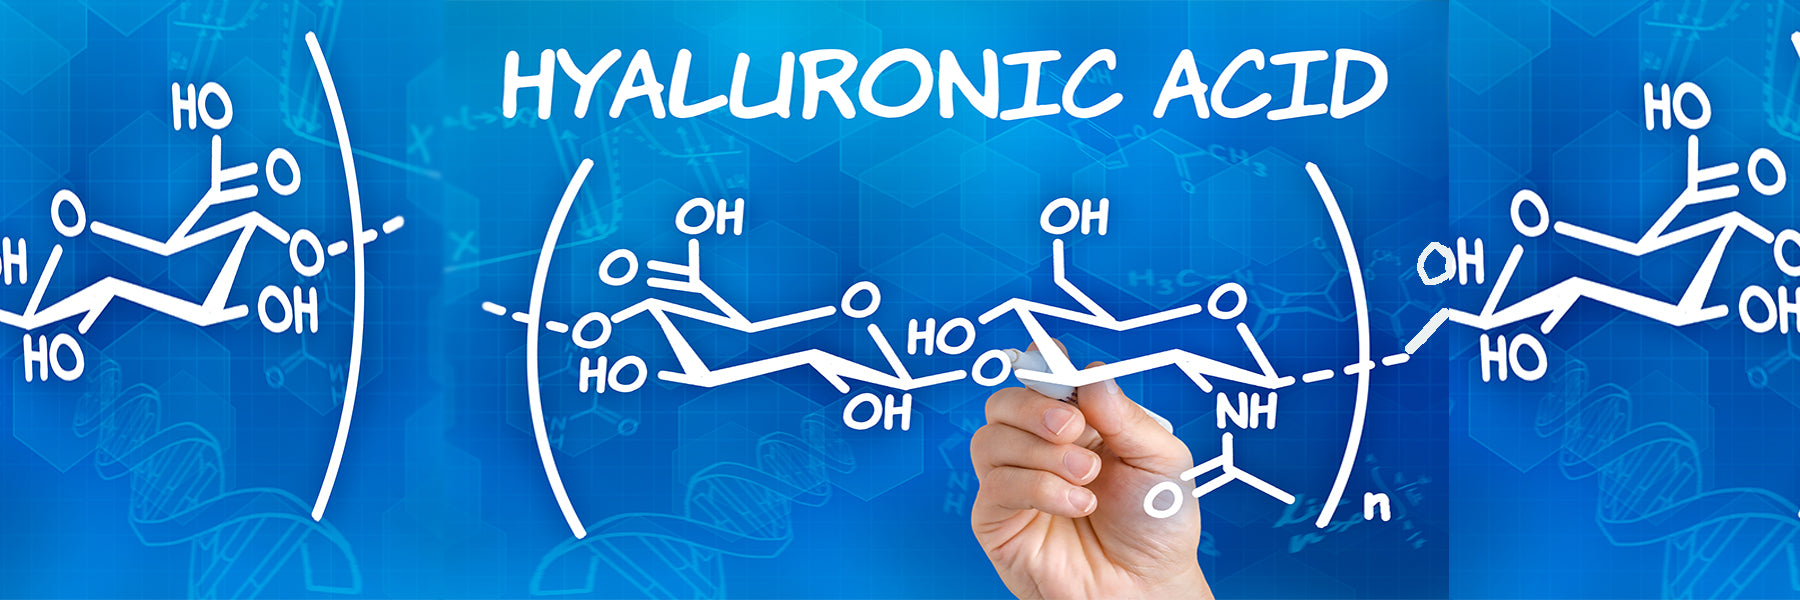 Hyaluronic Acid: Benefits and Why You Should Use It